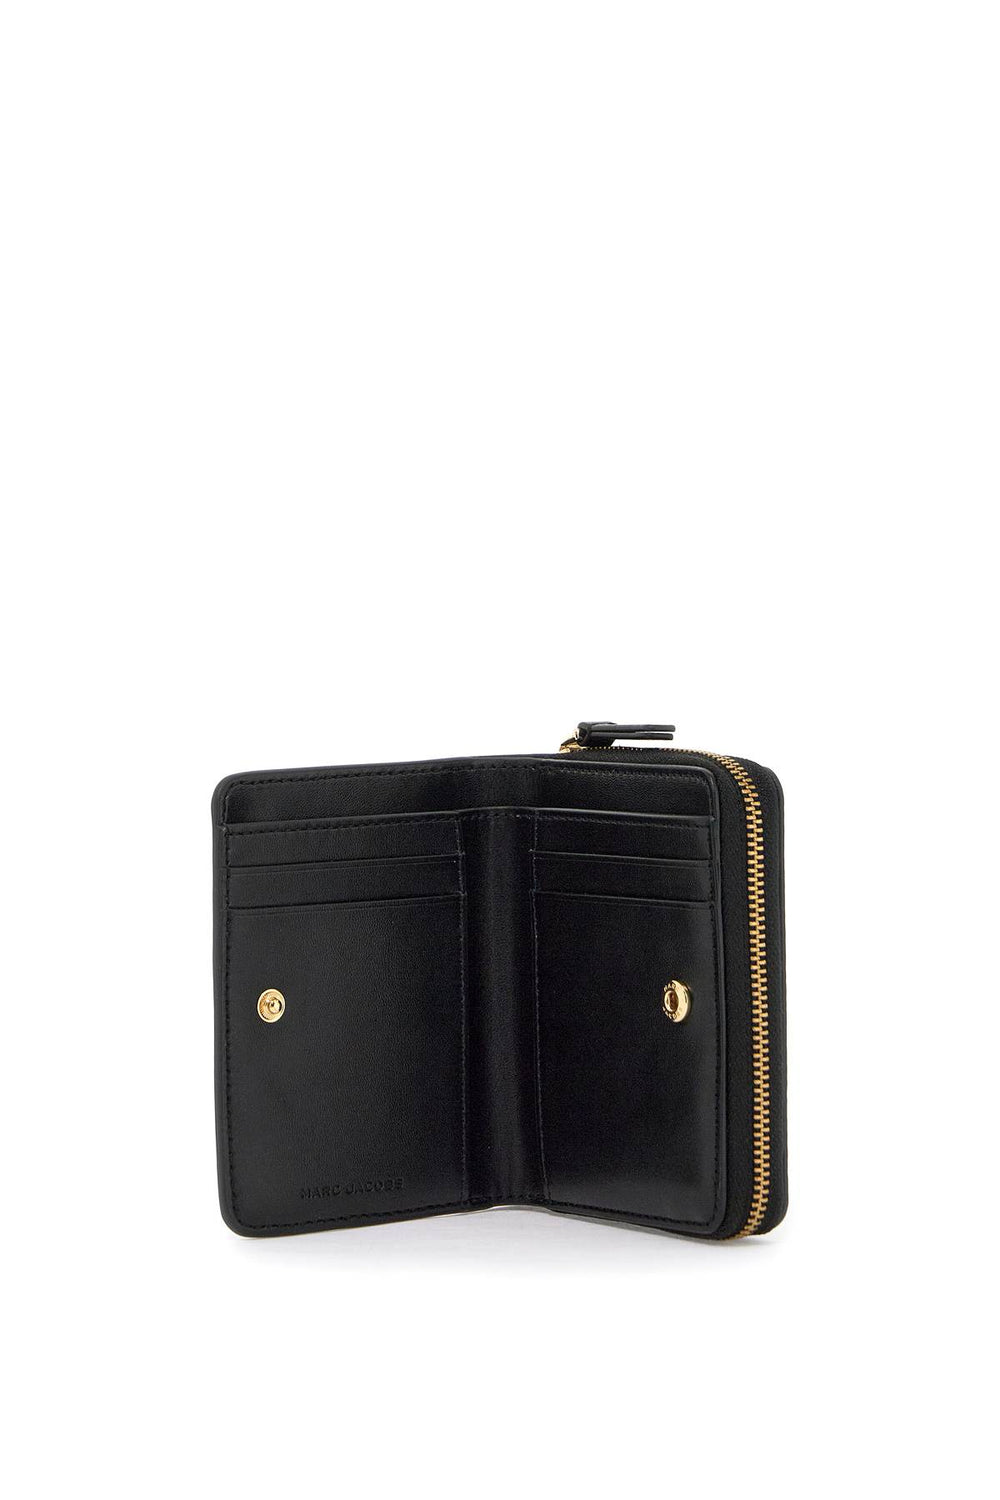 the leather mini compact wallet-1